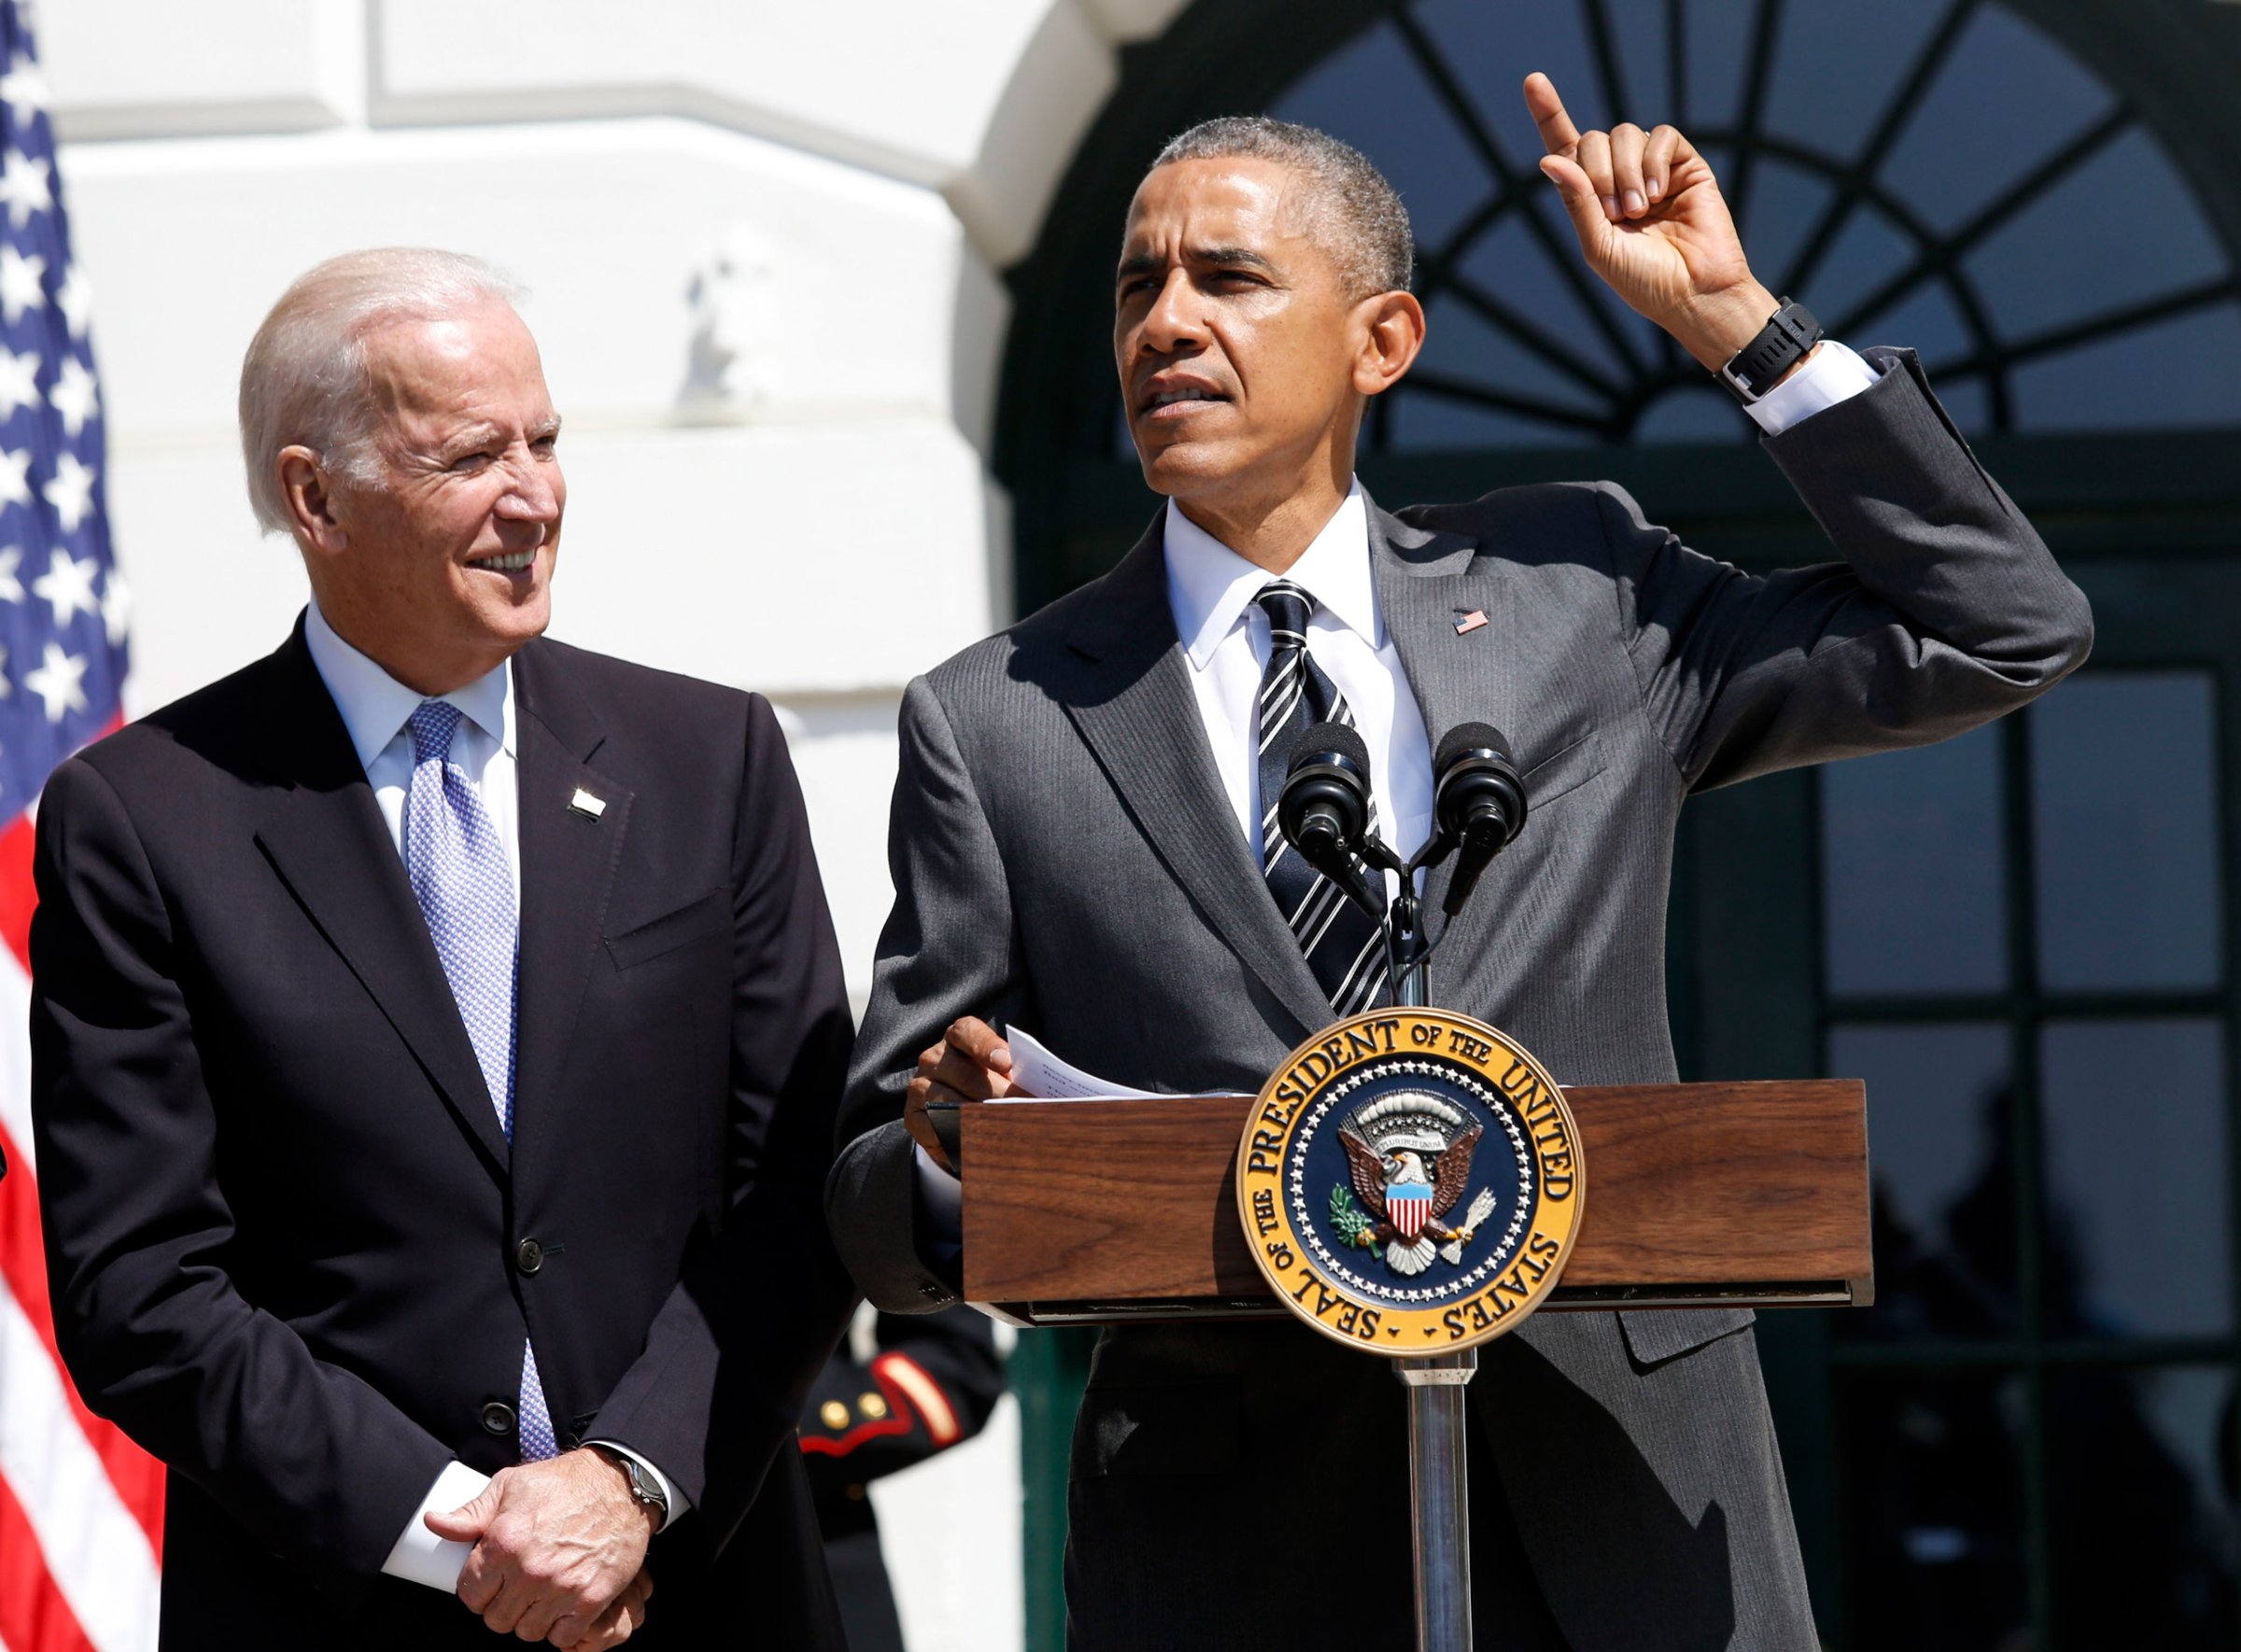 US President Barack Obama (R) speaks during the Wounded Warrior Ride event while Vice President Joe Biden (L) listens at the White House, in Washington, DC, USA on April 14, 2016. The event helps raise awareness to the public about severely injured veterans and provides rehabilitation opportunities. Photo by Aude Guerrucci/Pool/Sipa USA